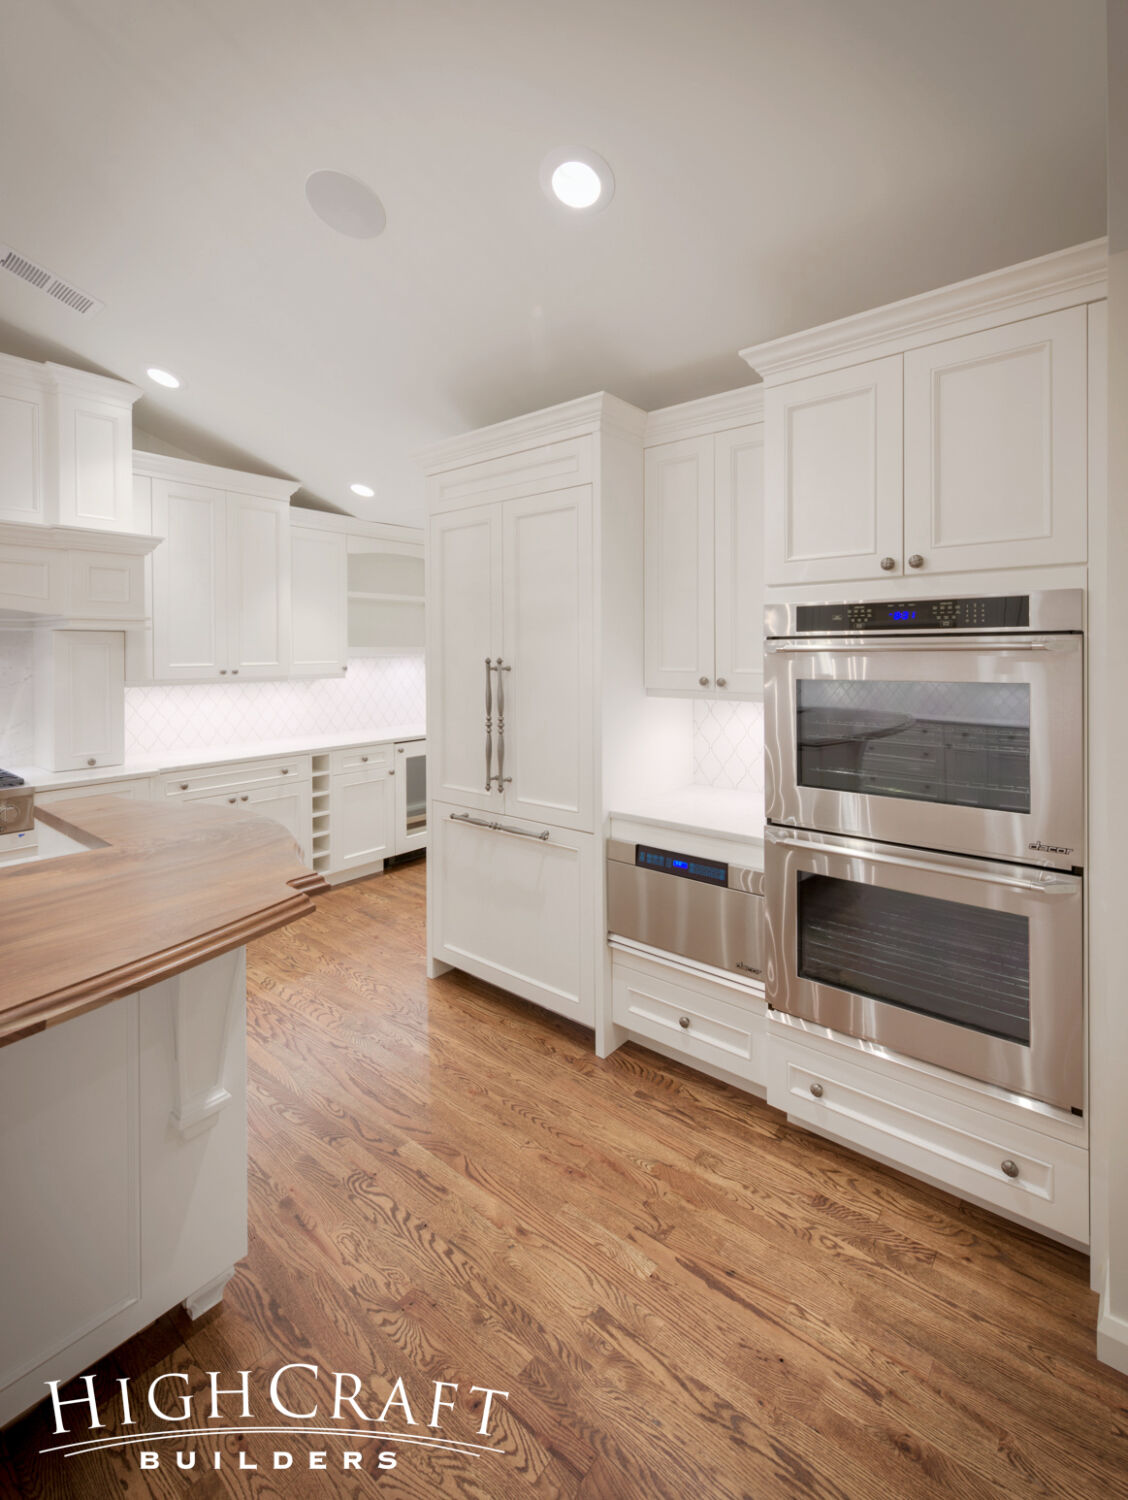 Kitchen-And-Great-Room-Addition-White-Cabinets-Paneled-Fridge-Appliances-Double-Oven-Oak-Floors